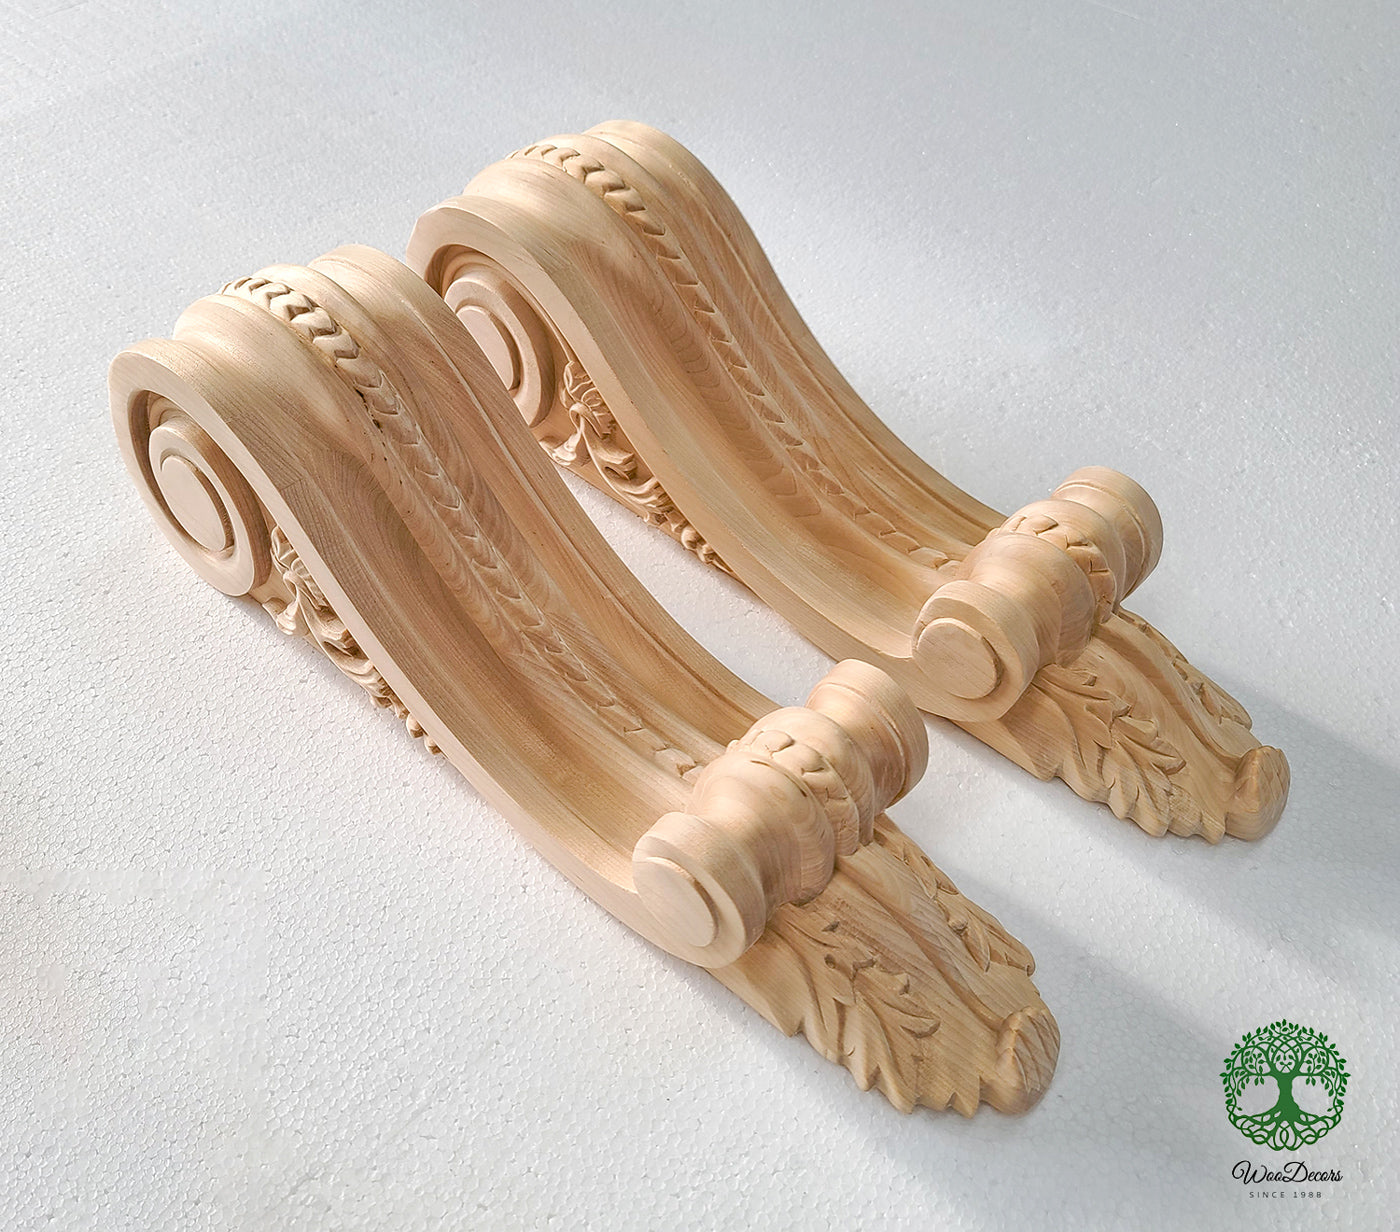 PAIR of Elegant Curved 15-3/4"H Corbels for Door Surround and Mantel